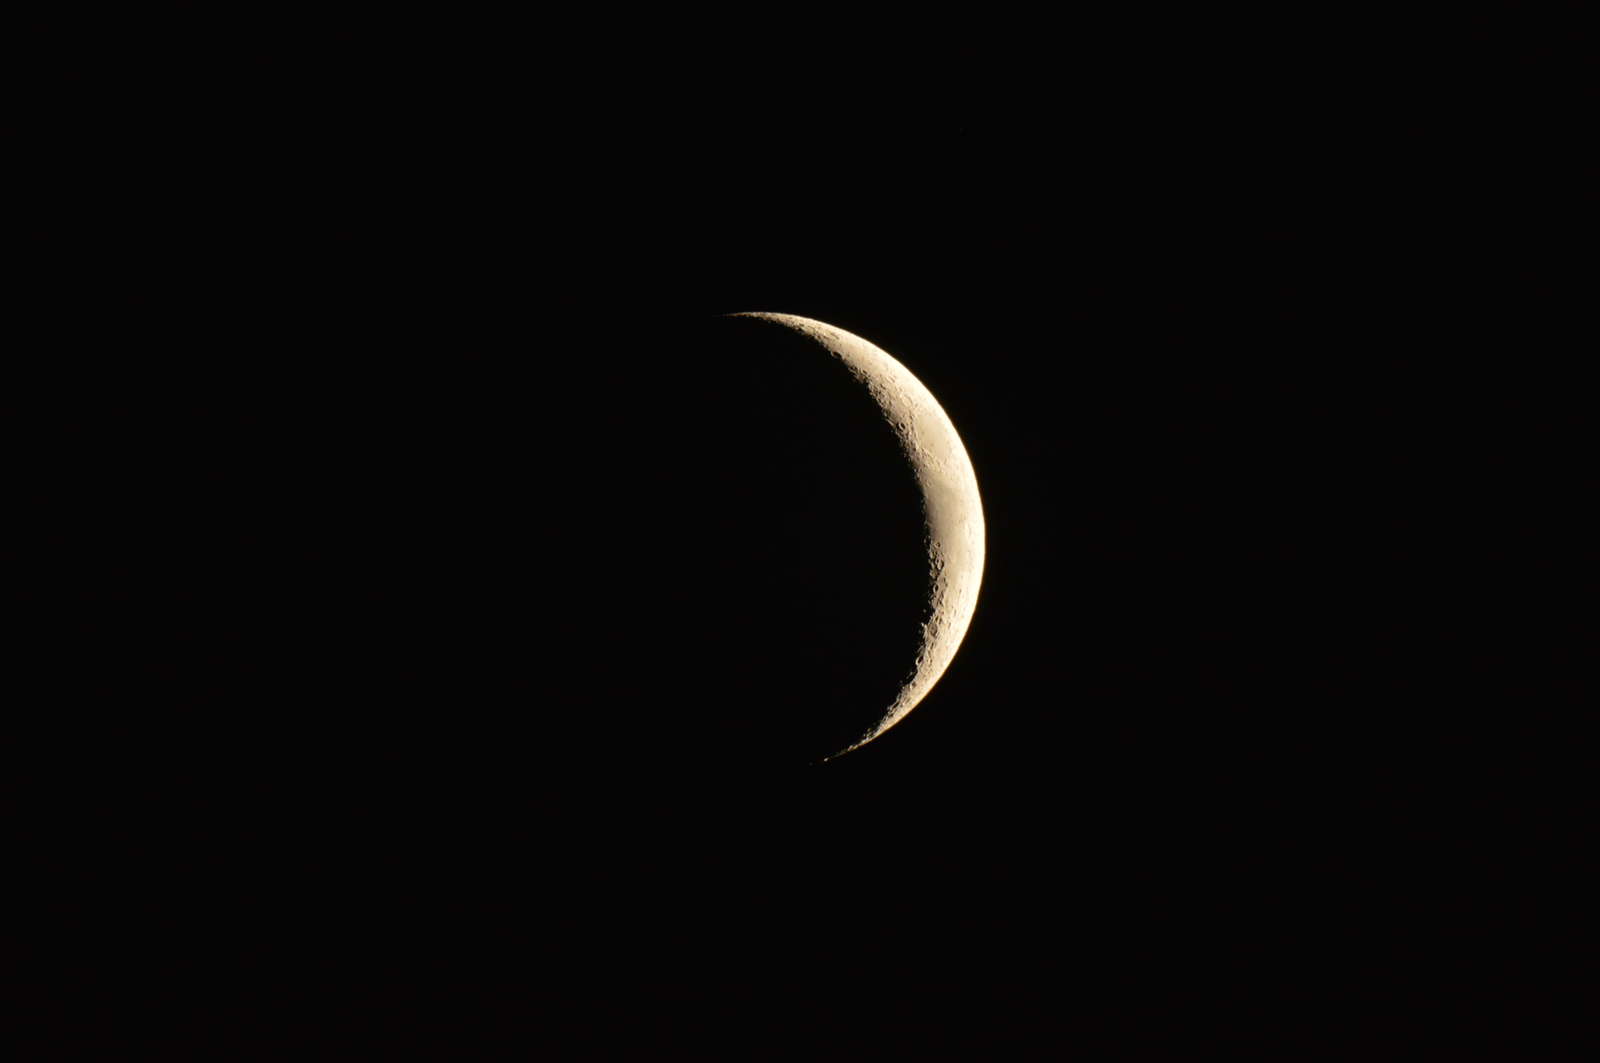 26 Apr, 2020 - waxing crescent about 3 days old